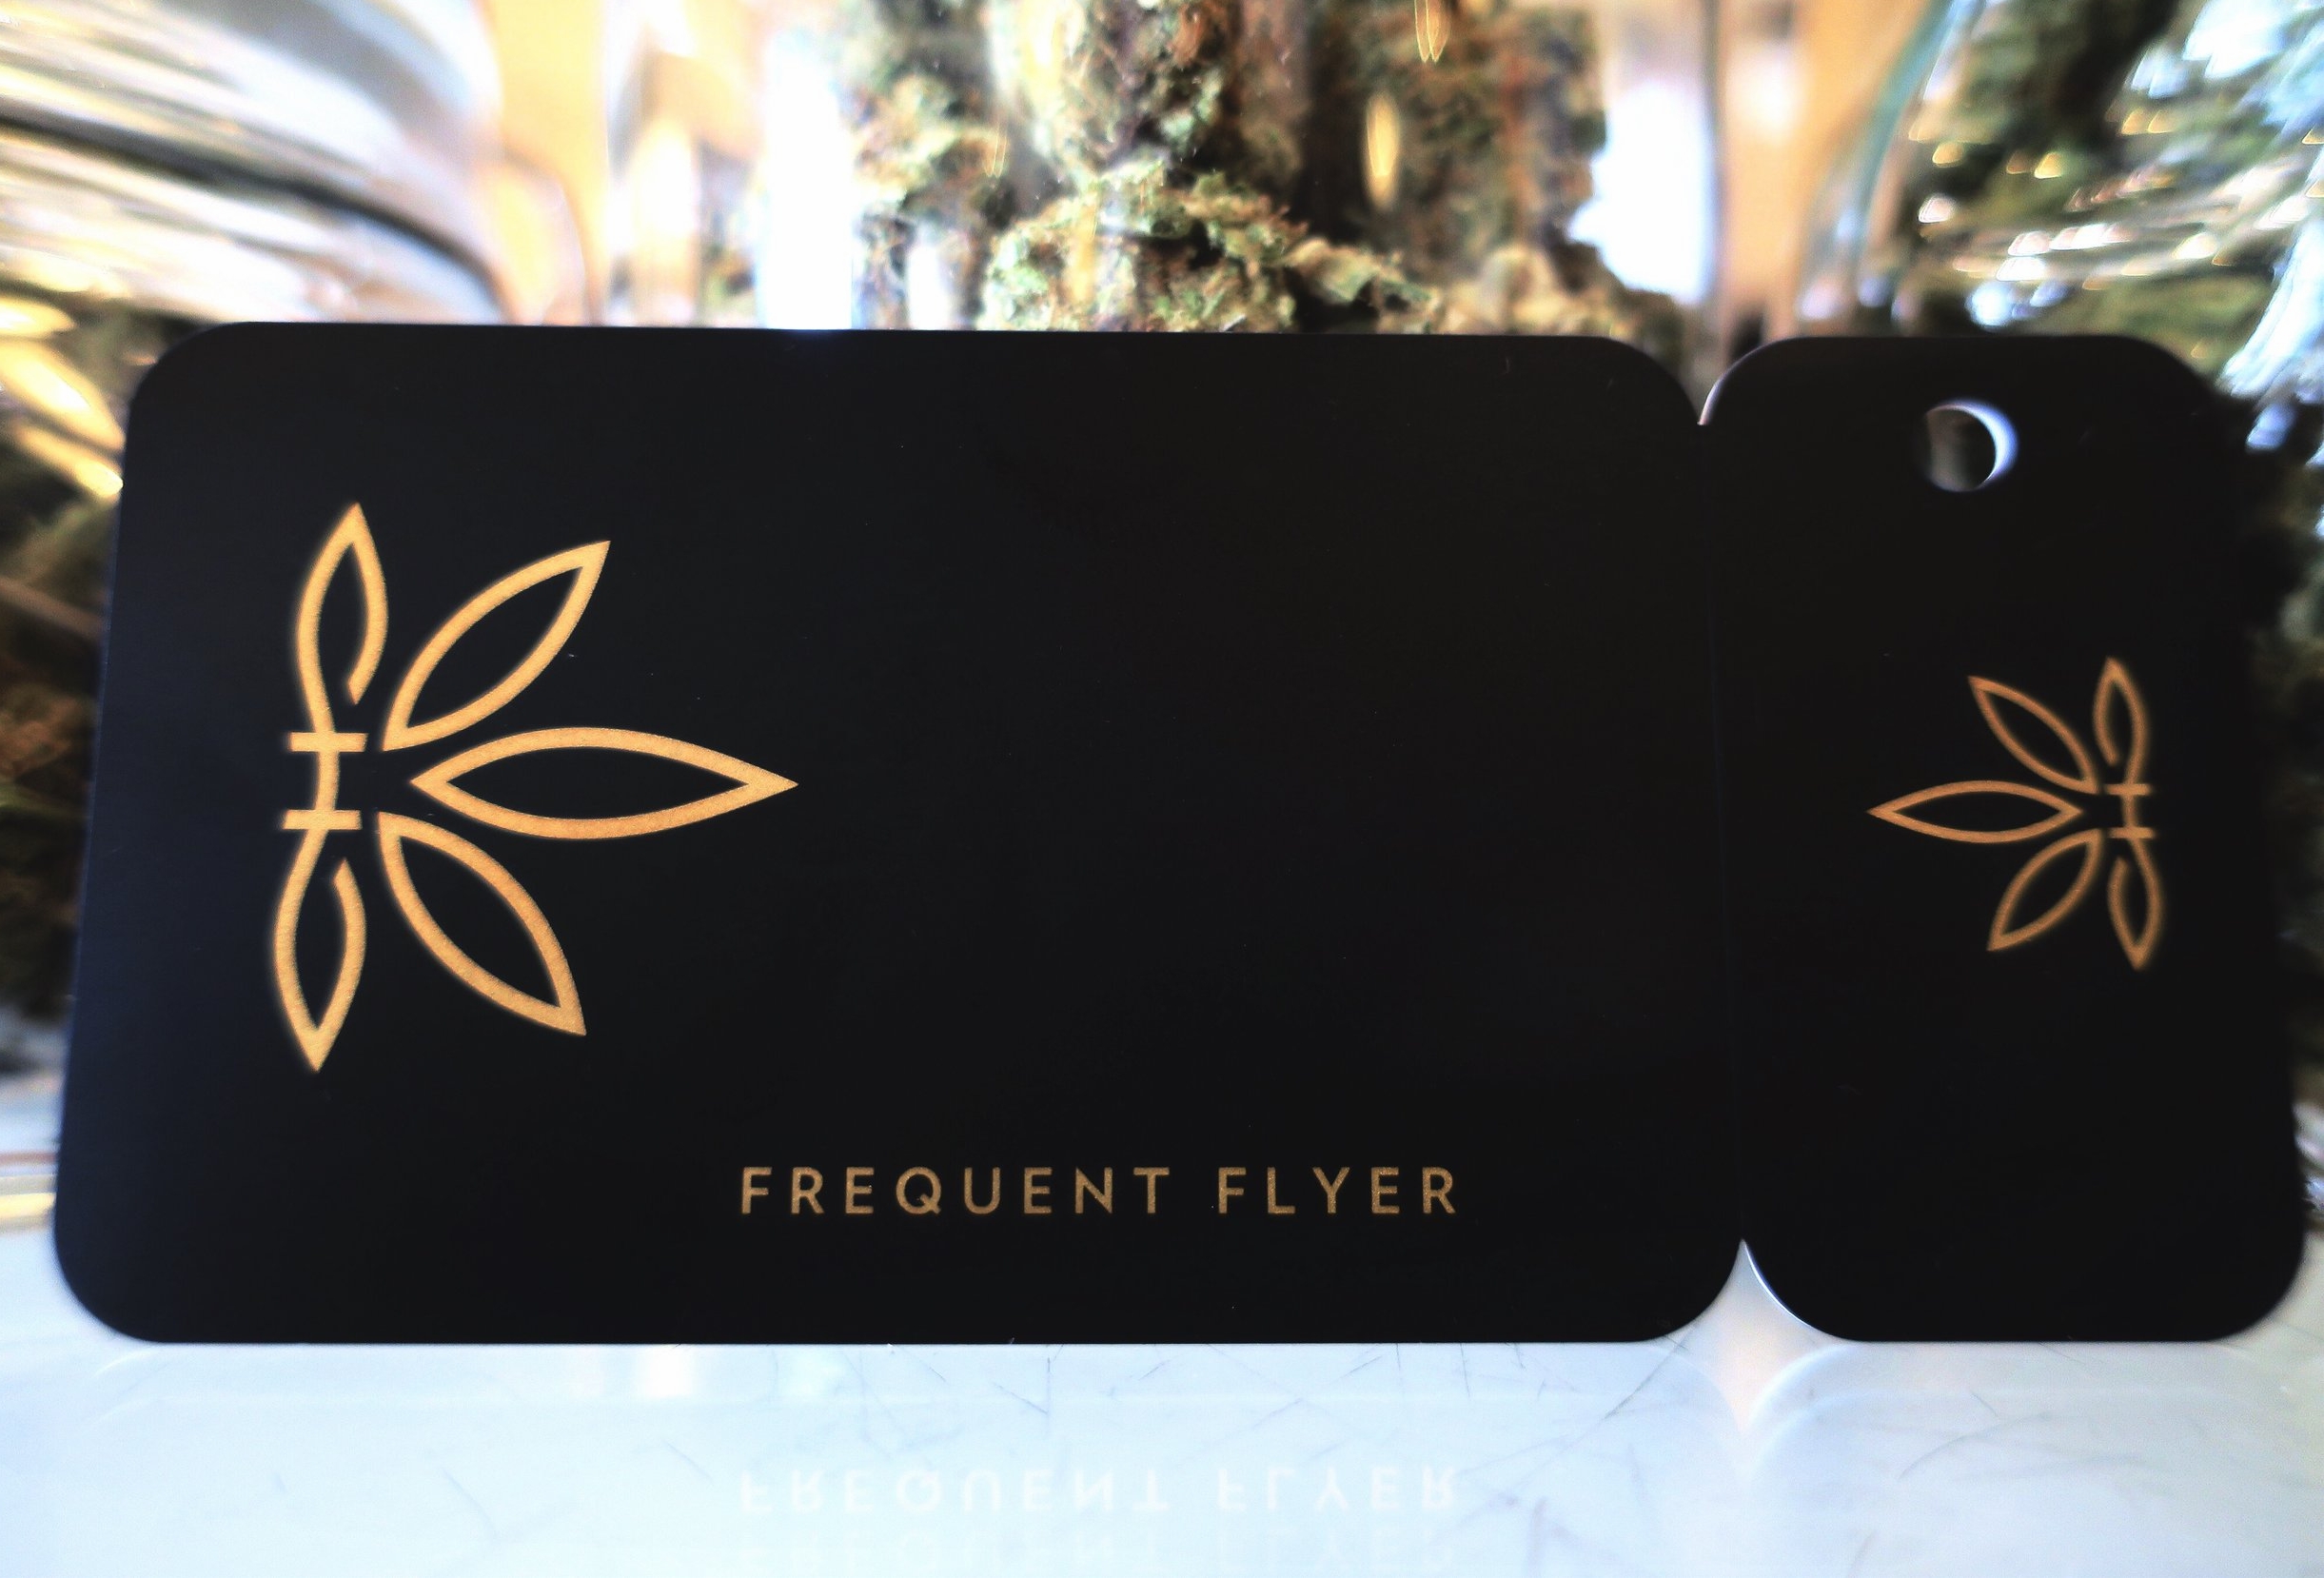 Frequent Flyer Card.jpg